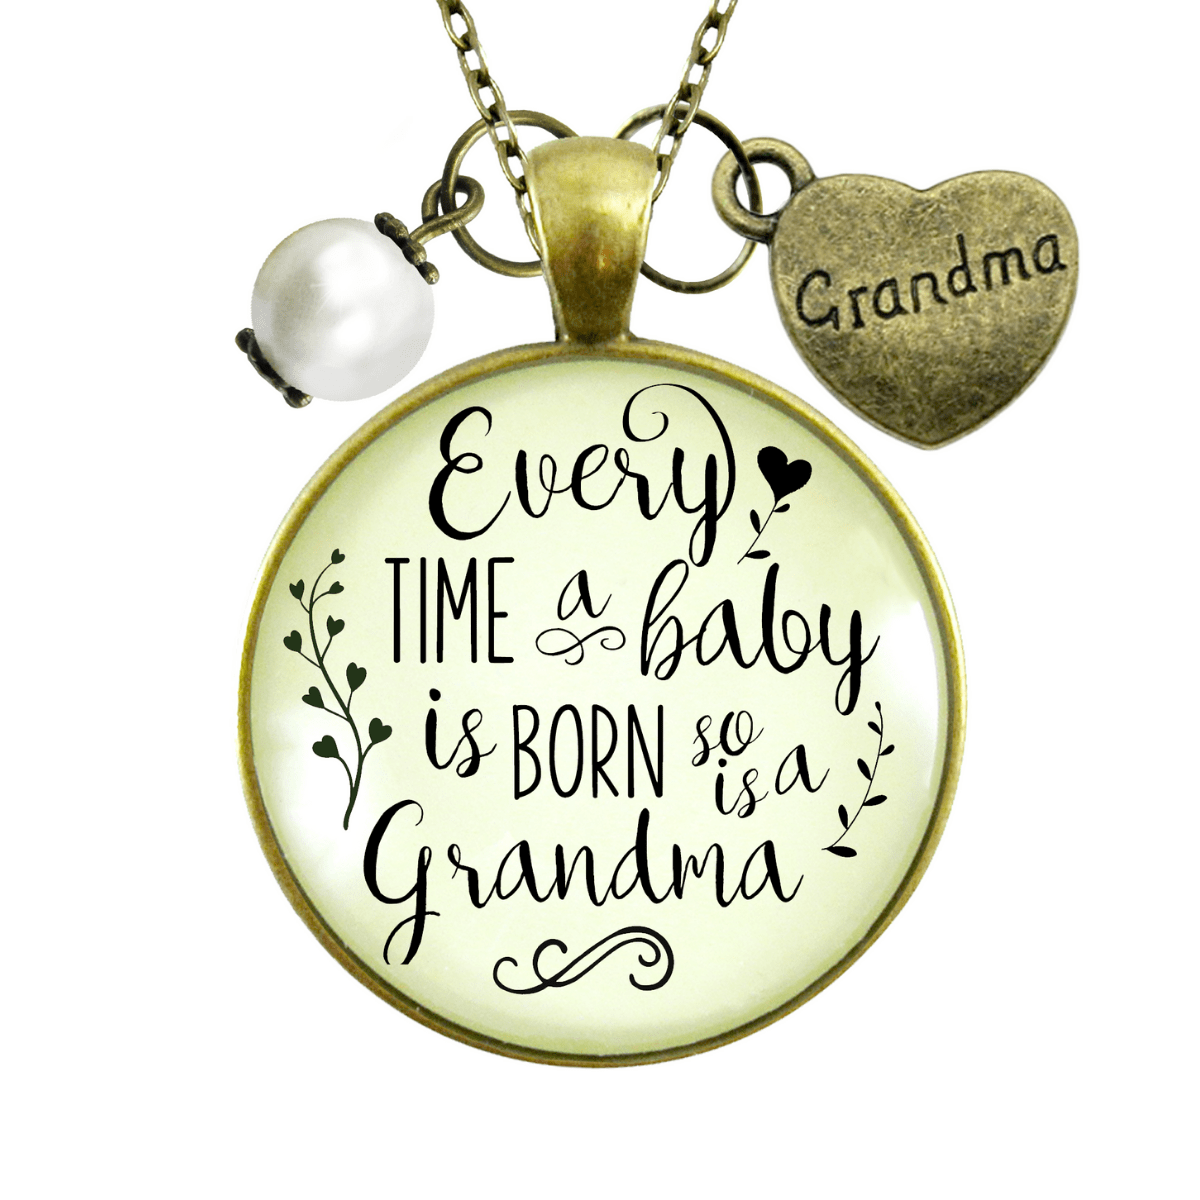 Gutsy Goodness New Grandma Necklace Every Time Baby Born Jewelry Gift from Daughter - Gutsy Goodness Handmade Jewelry;New Grandma Necklace Every Time Baby Born Jewelry Gift From Daughter - Gutsy Goodness Handmade Jewelry Gifts